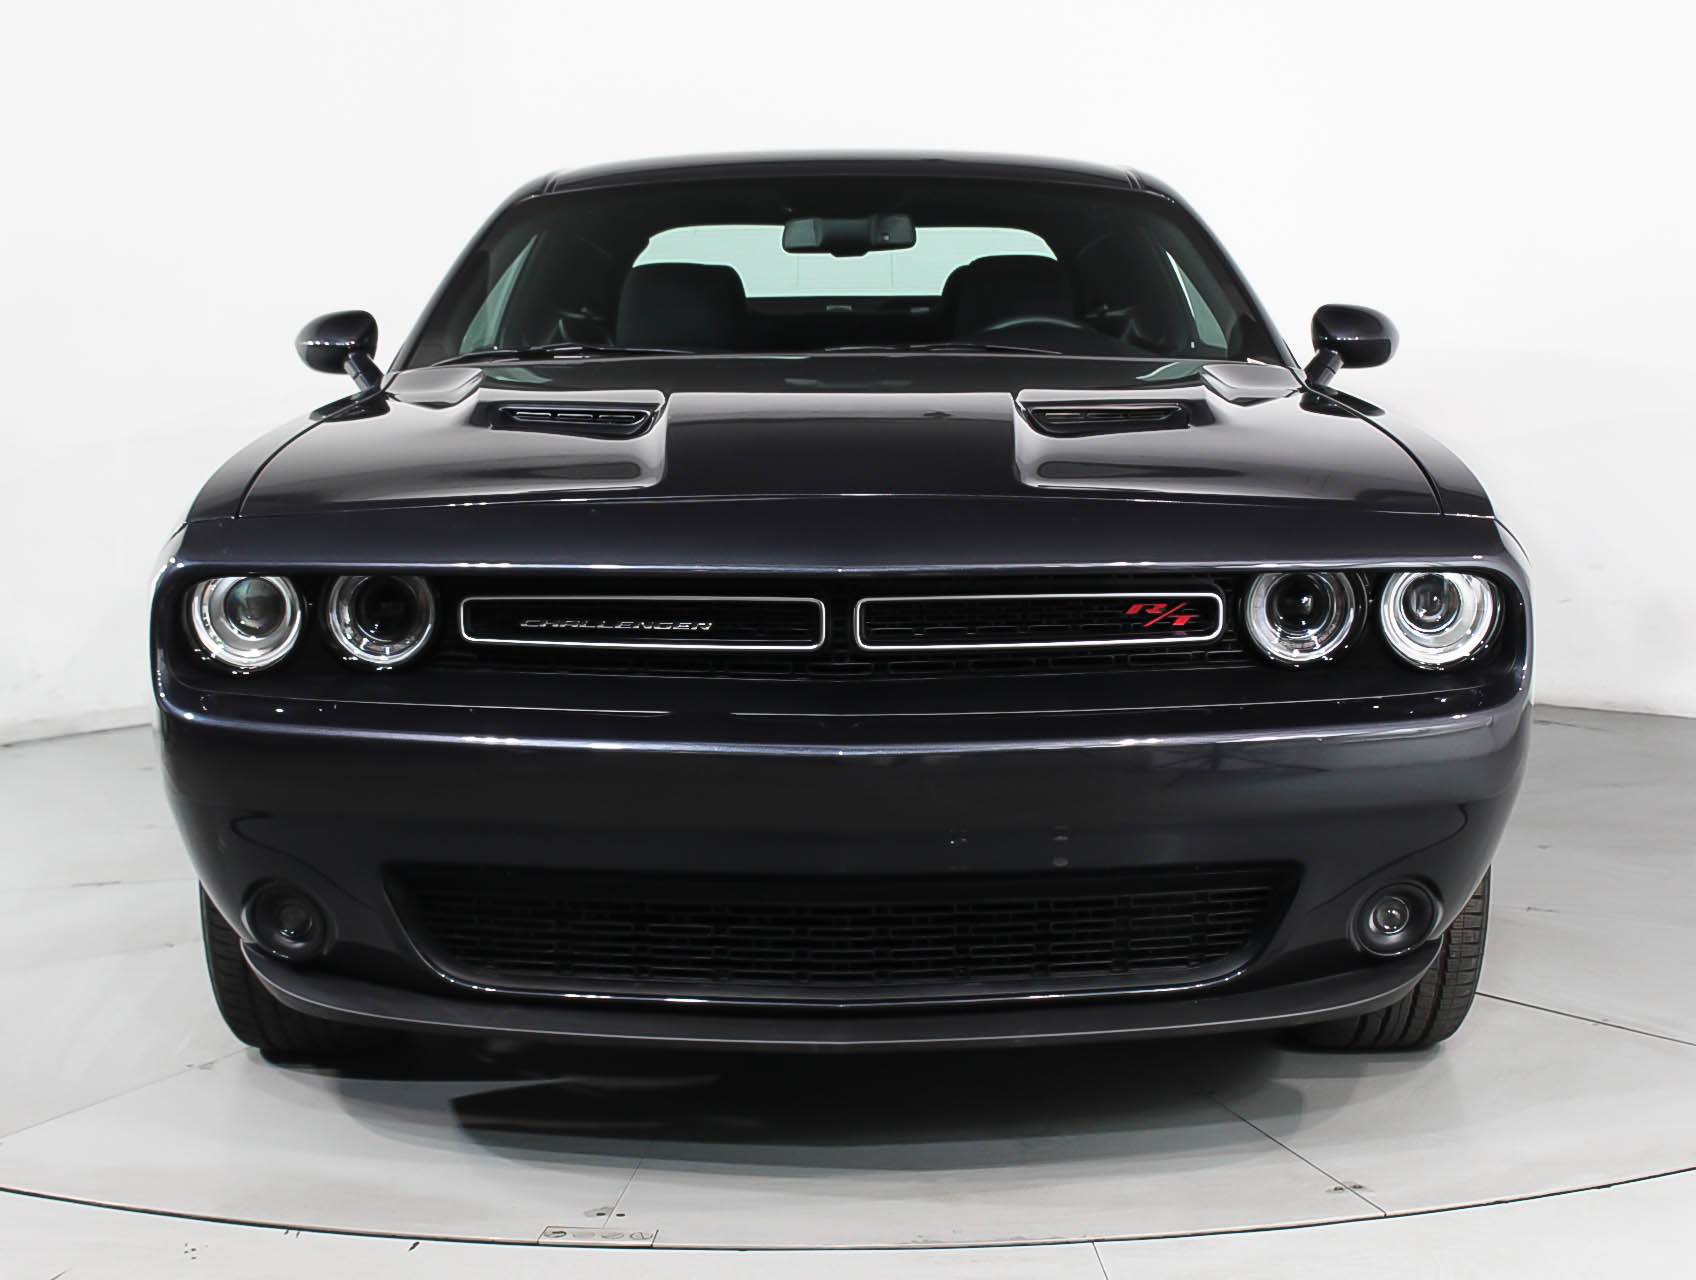 Florida Fine Cars - Used DODGE CHALLENGER 2018 HOLLYWOOD R/T